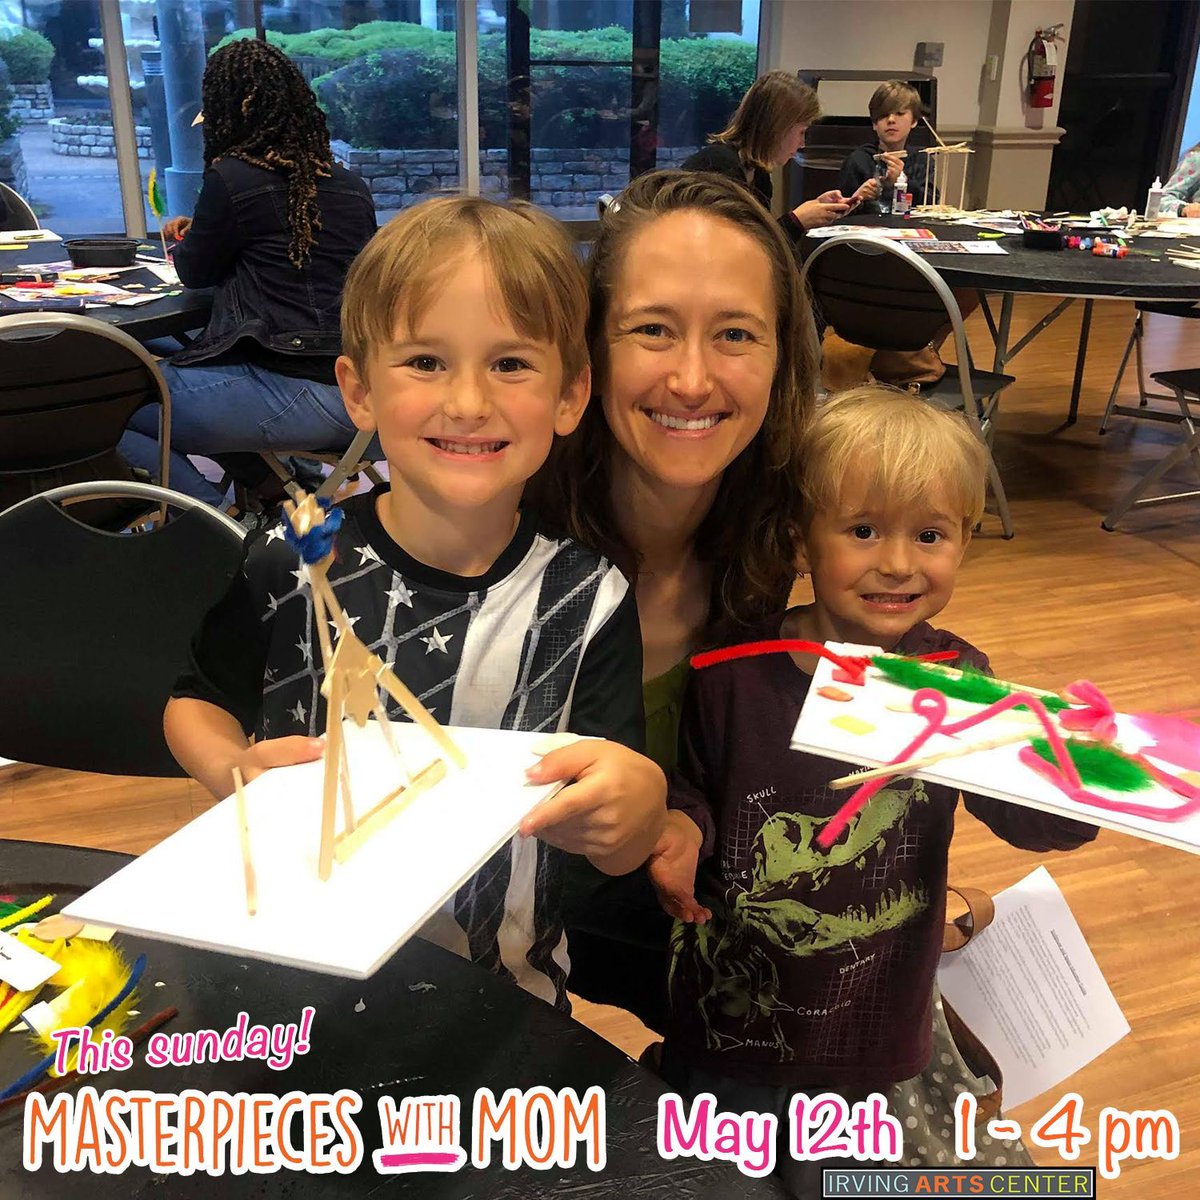 Bring your mom, aunt, grandma, or any significant person in your life this Mother's Day for some FREE art-making family fun! 

#mothersday #mamasday #familyfun #artsandcrafts #sundayfunday